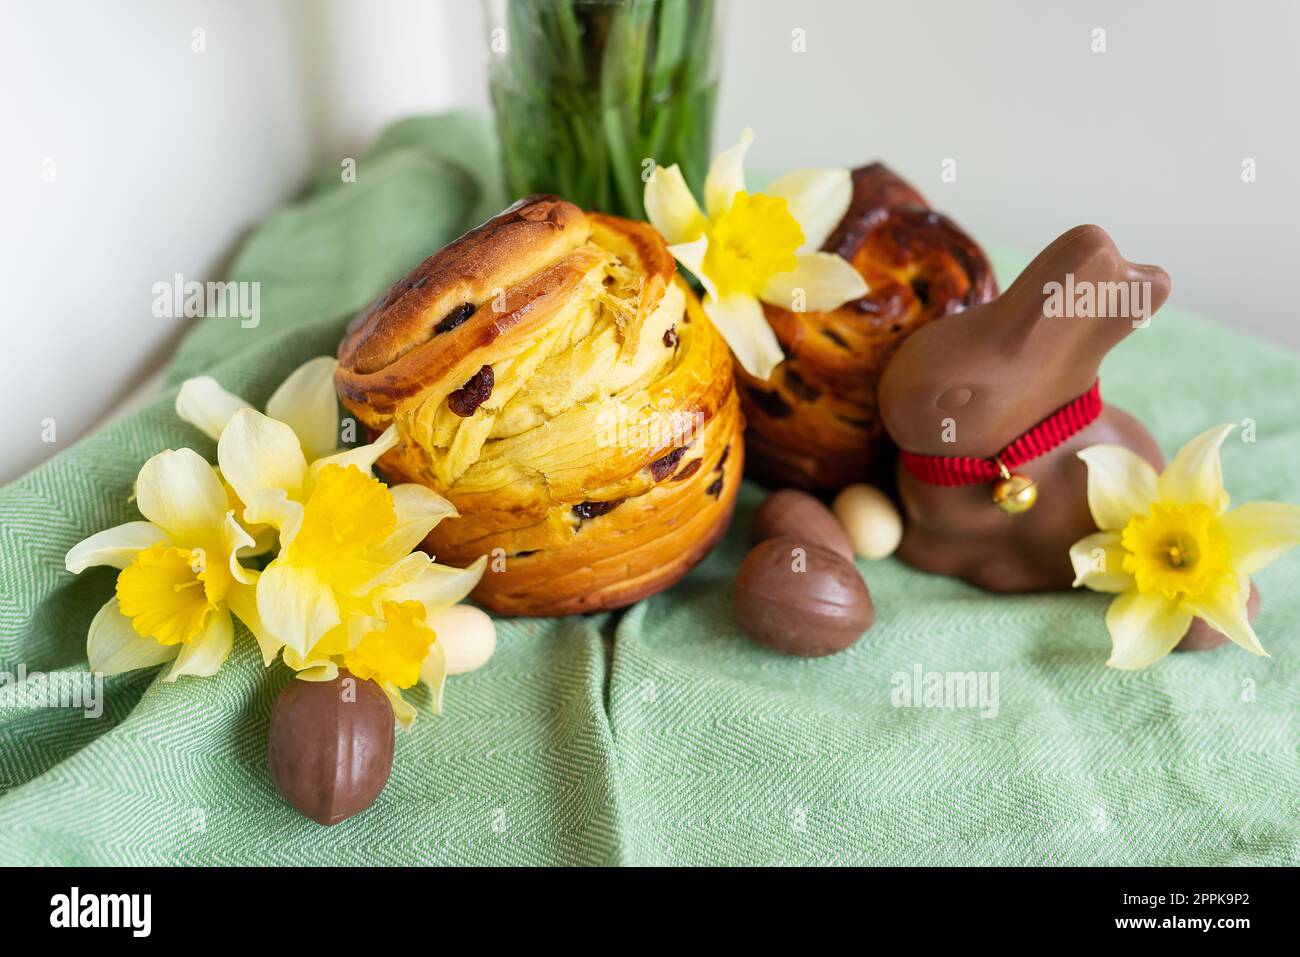 Homemade Easter traditional pastries lie on a green napkin along with daffodil flowers, rabbit, chocolate eggs. Easter baking and decoration. Stock Photo